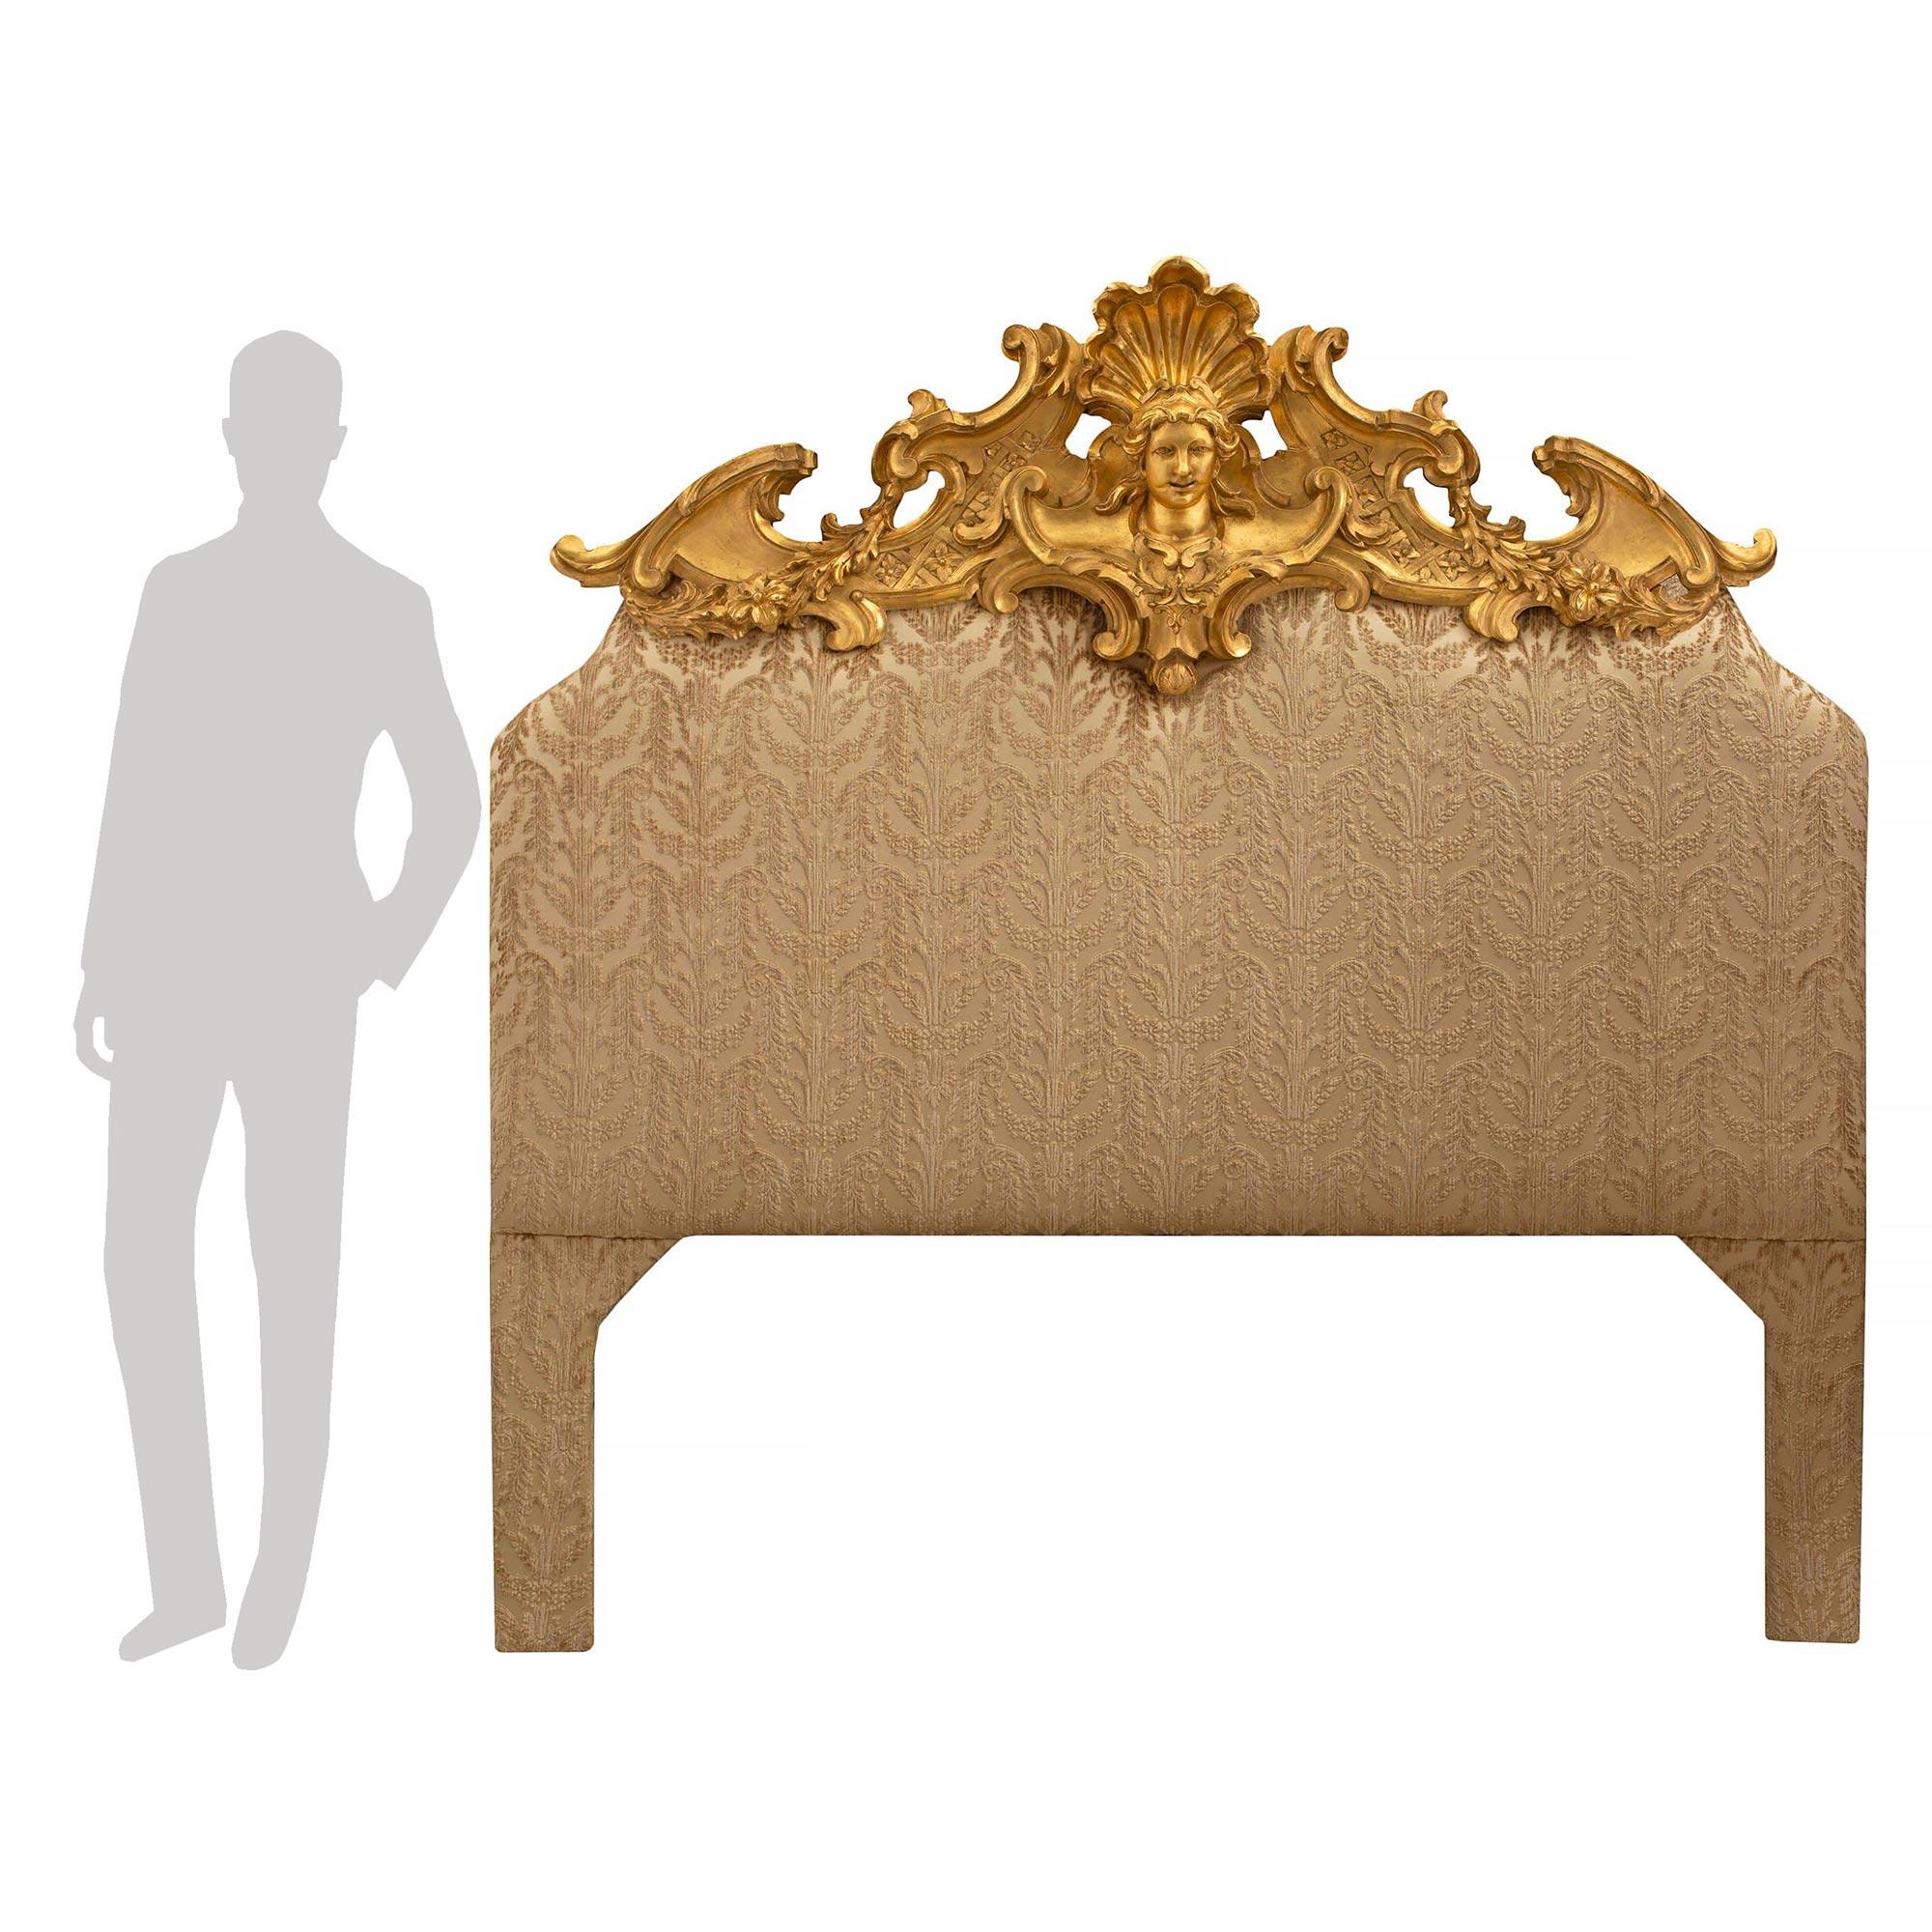 A striking Italian early 19th century Louis XV st. upholstered and giltwood headboard. The headboard displays an impressive and most decorative carved giltwood top crown. The top crown is centered by a richly carved maiden's face with a beautiful